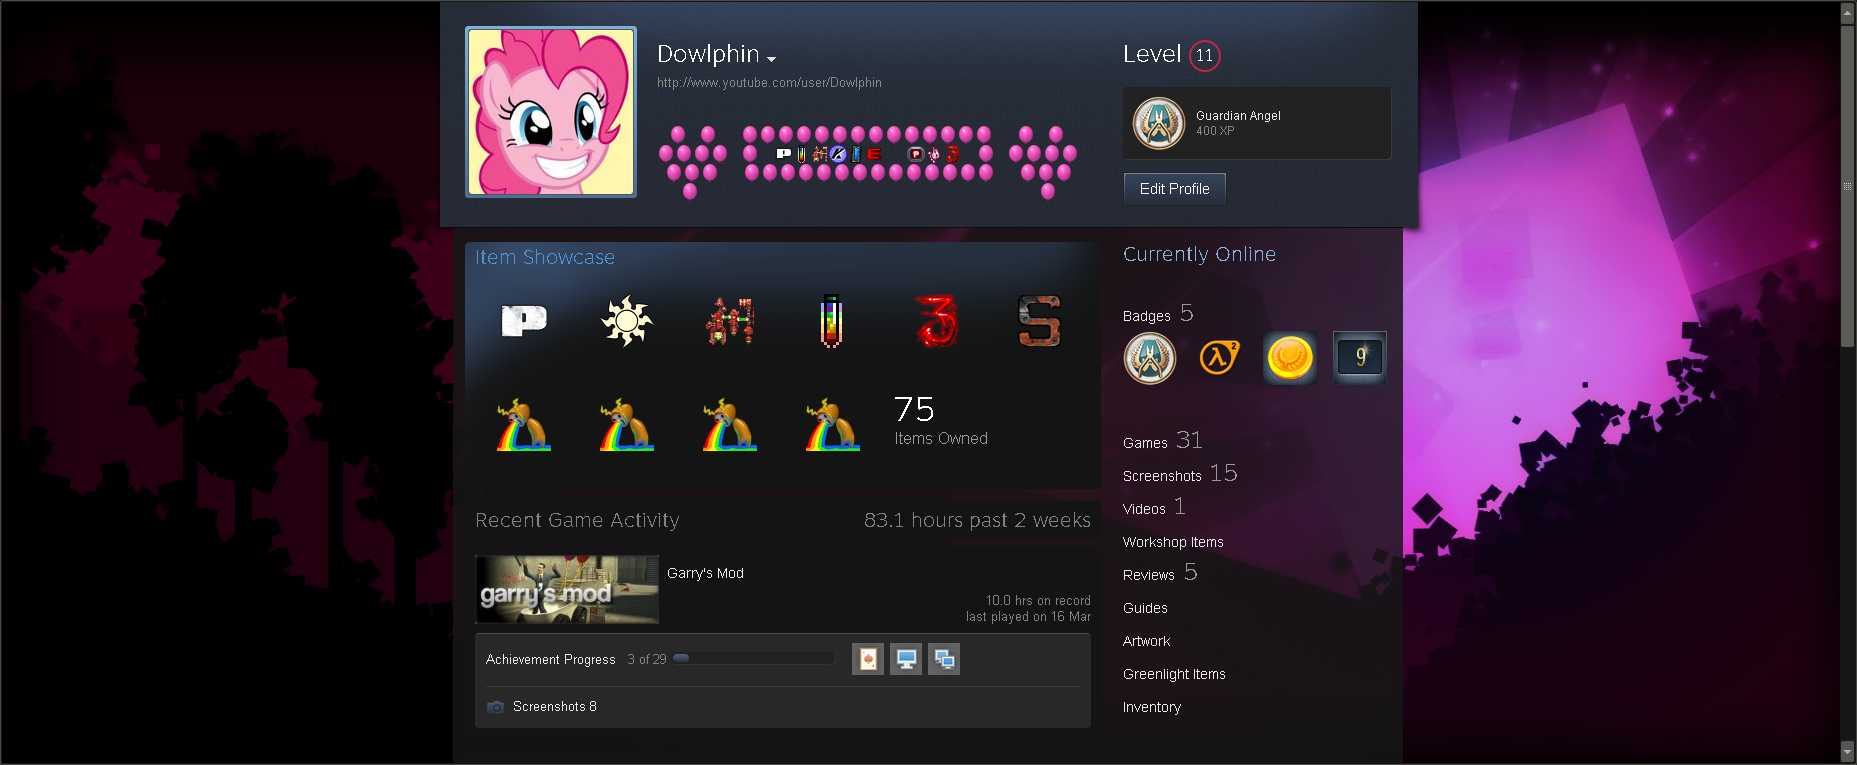 Emotional Text (Steam profile) by Dowlphin on DeviantArt